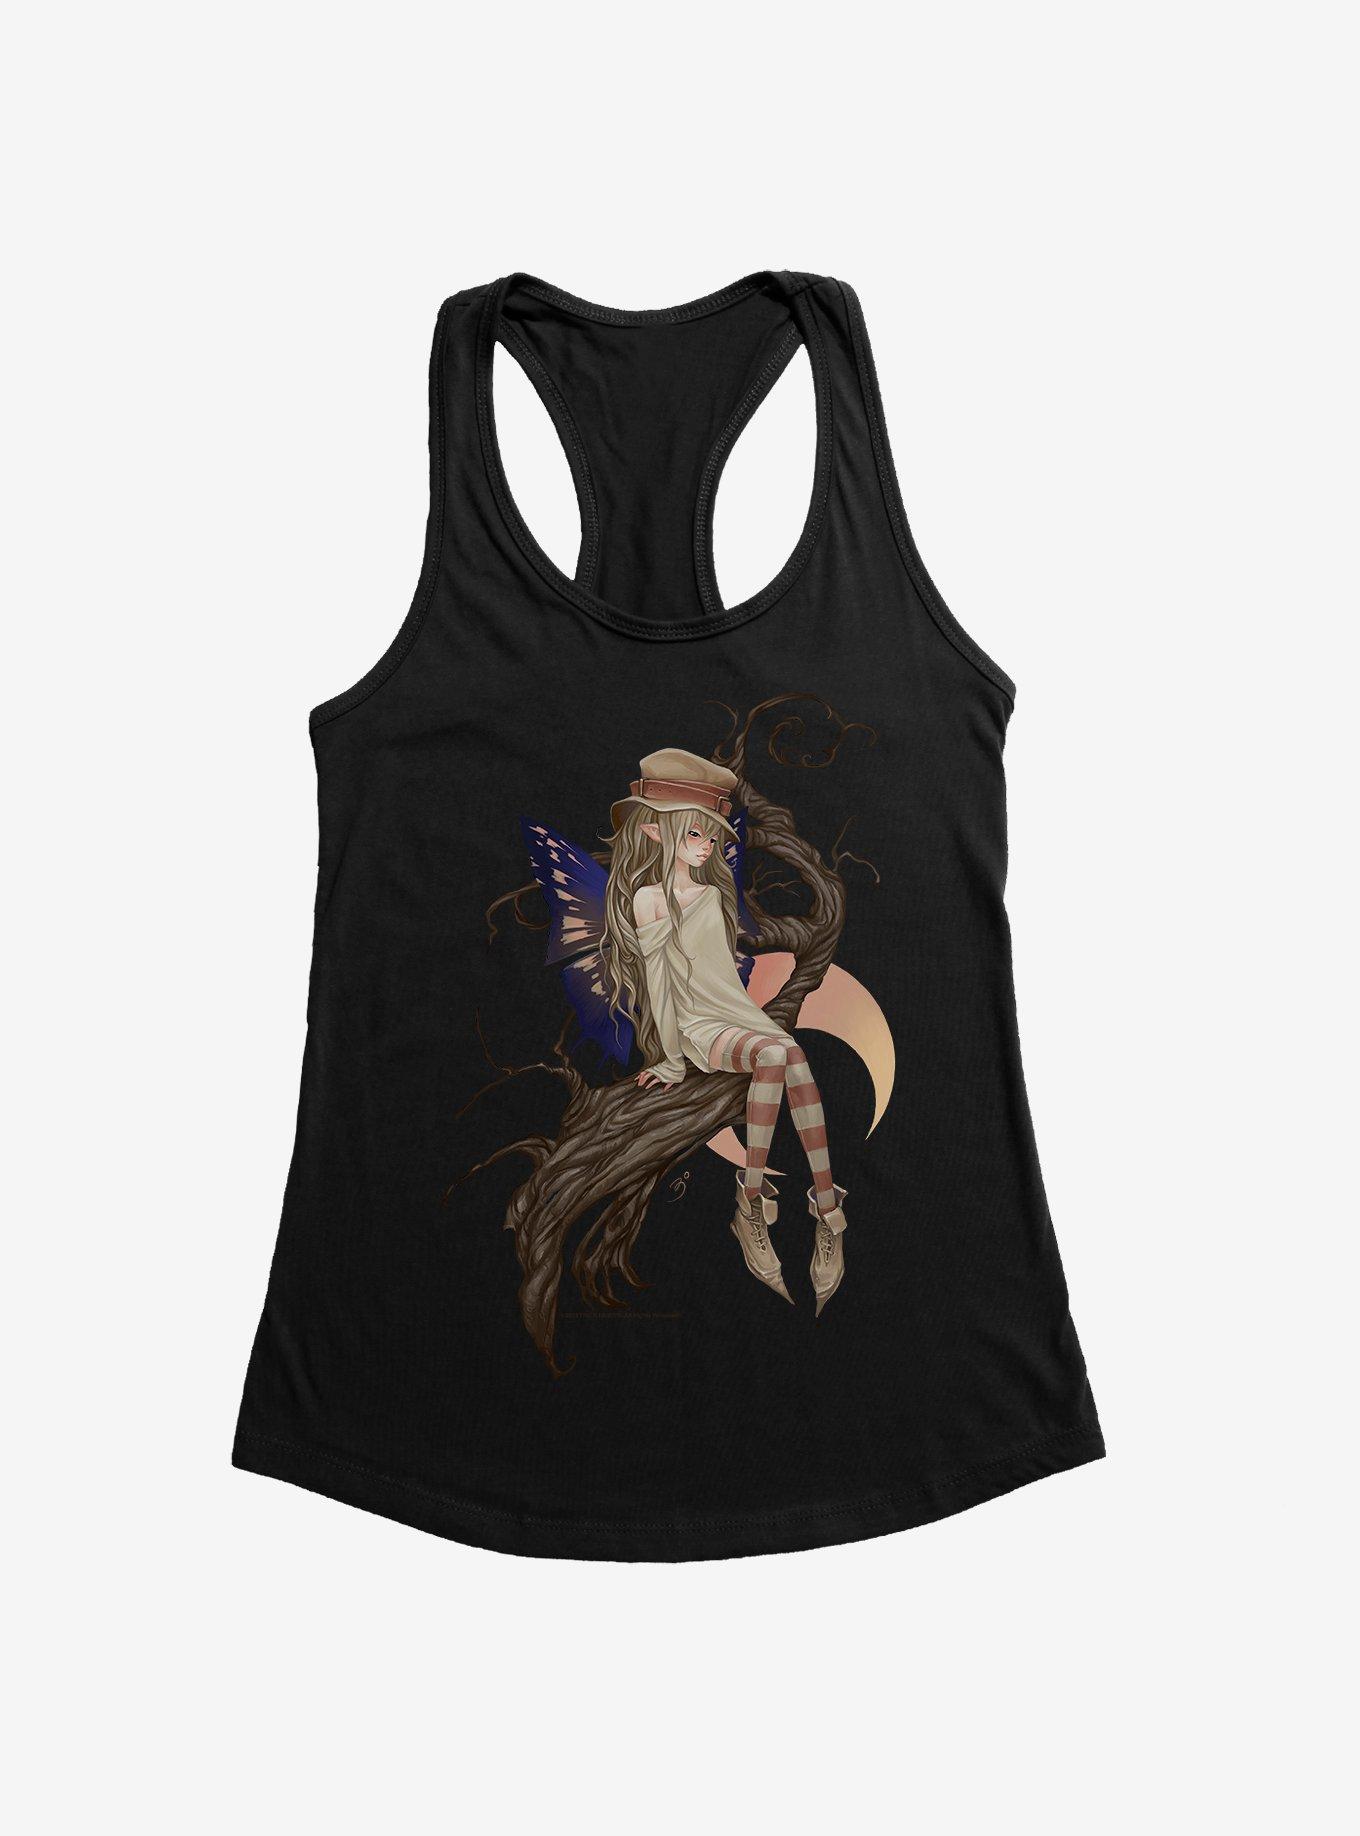 Fairies By Trick Butterfly Fairy Girls Tank